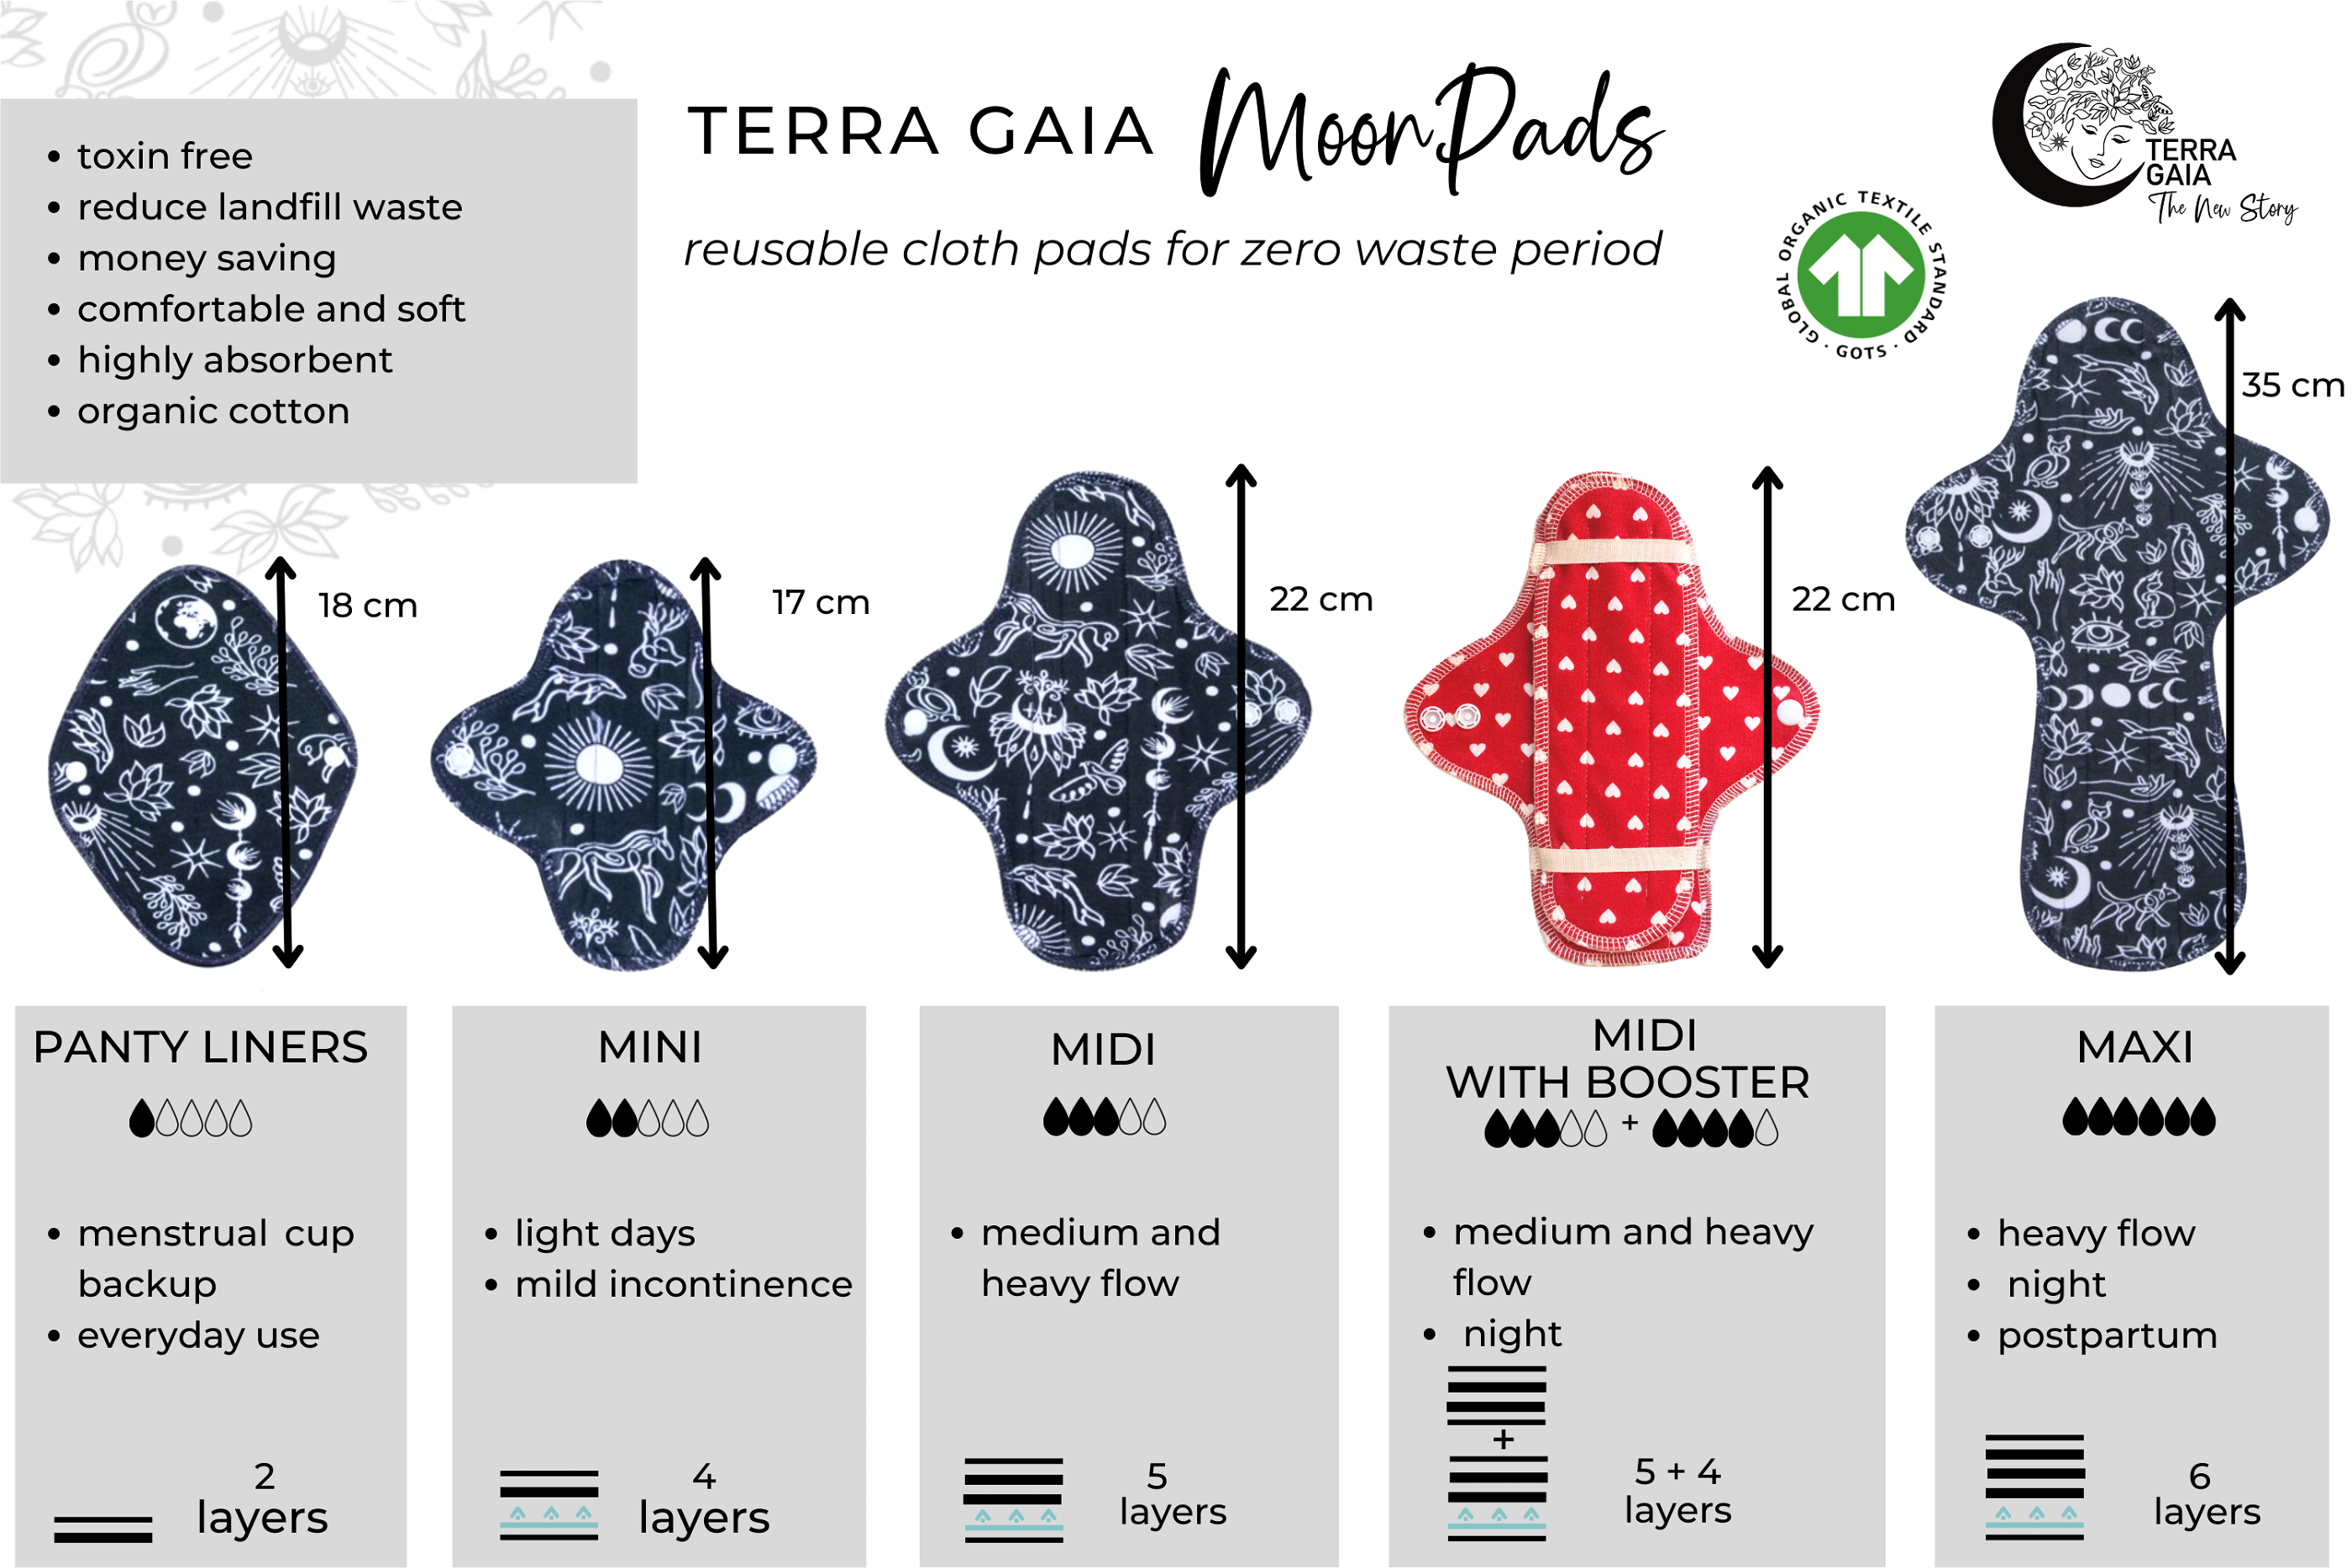 How to choose the right reusable cloth pad for you